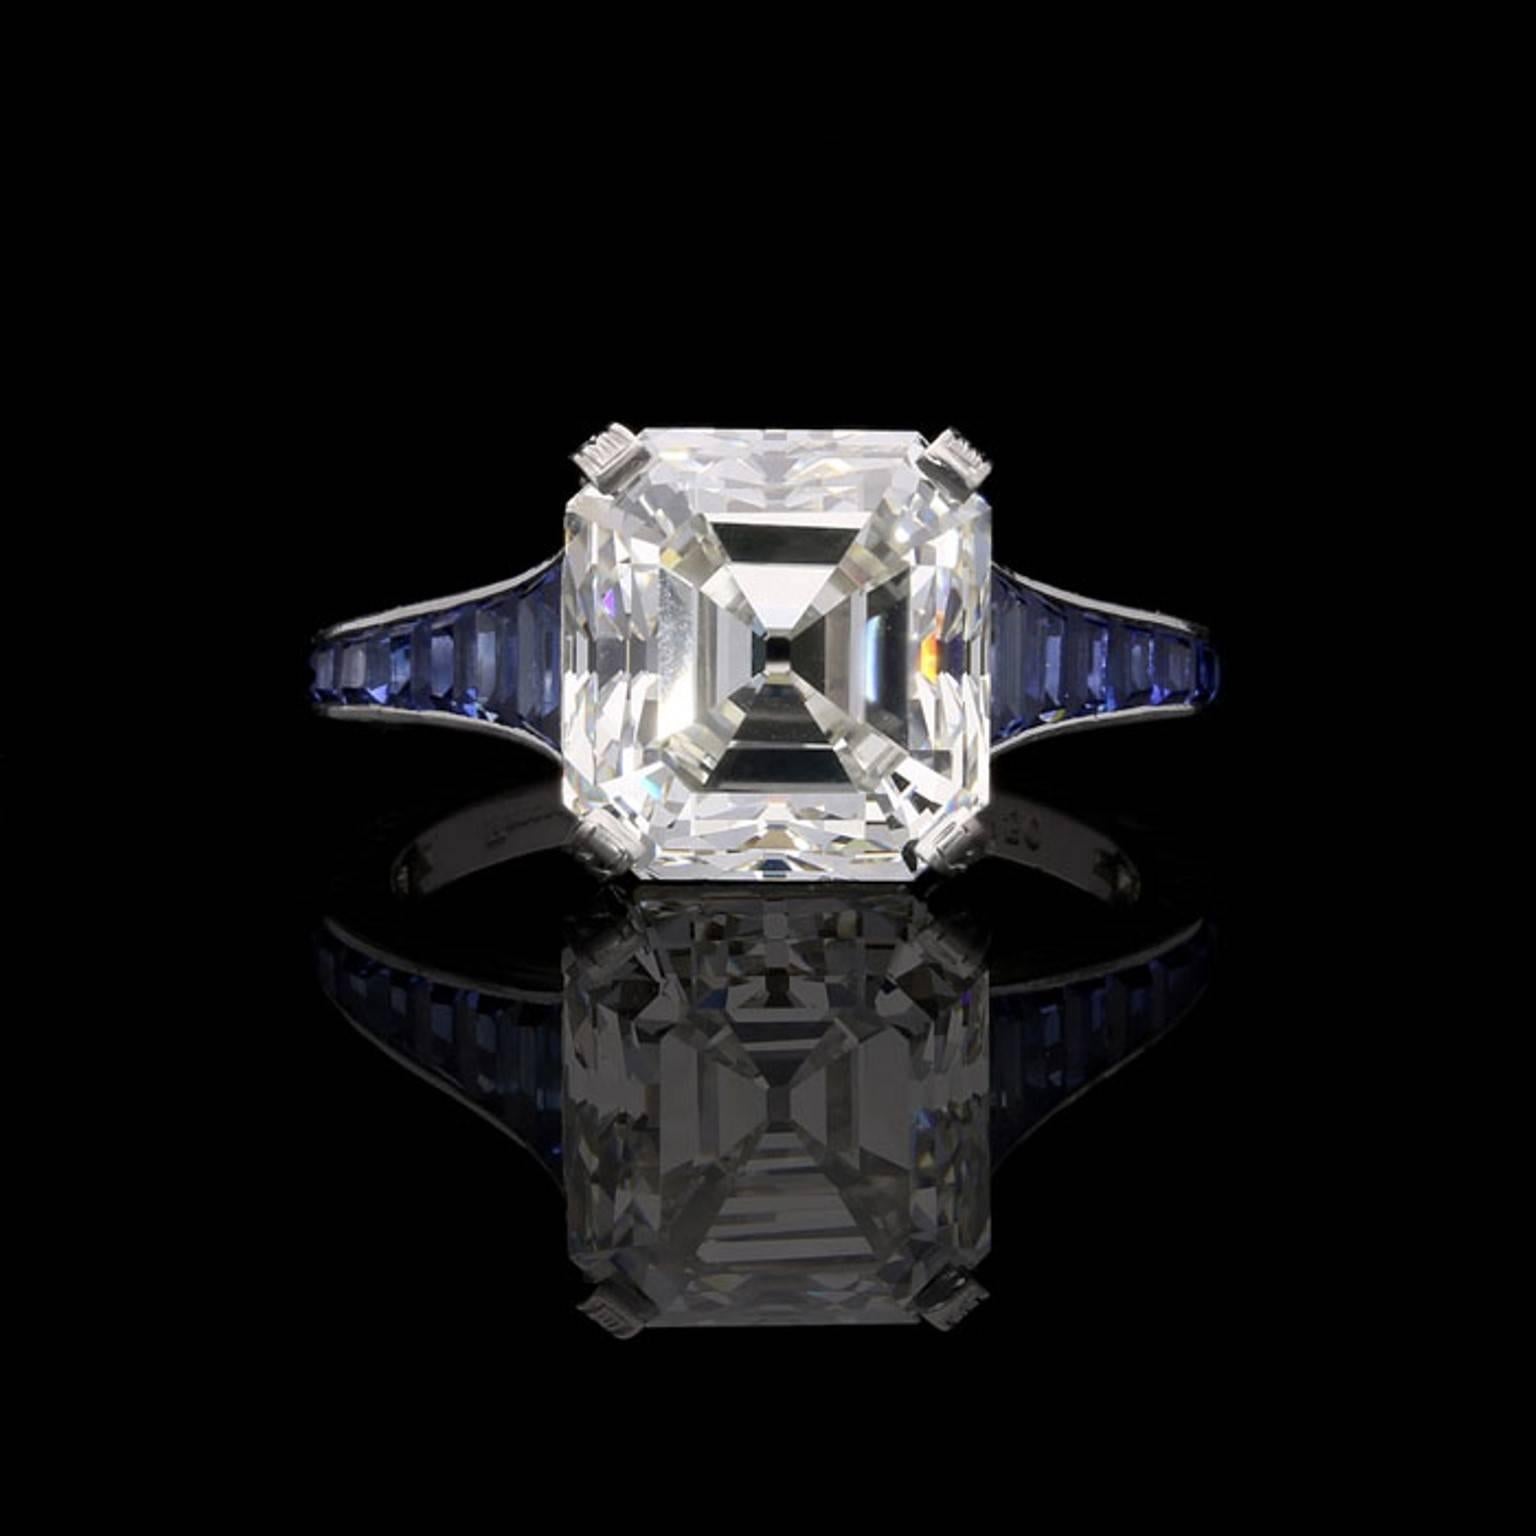 Asscher cut diamond 5.03ct J VVS2 with GIA cert 
UK finger size L 1/2, US size 6.25 Can be adjusted to your own Finger size
4.8 grams

A stunning Asscher-cut diamond ring by Hancocks, set to the centre with a beautiful Asscher diamond weighing 5.03